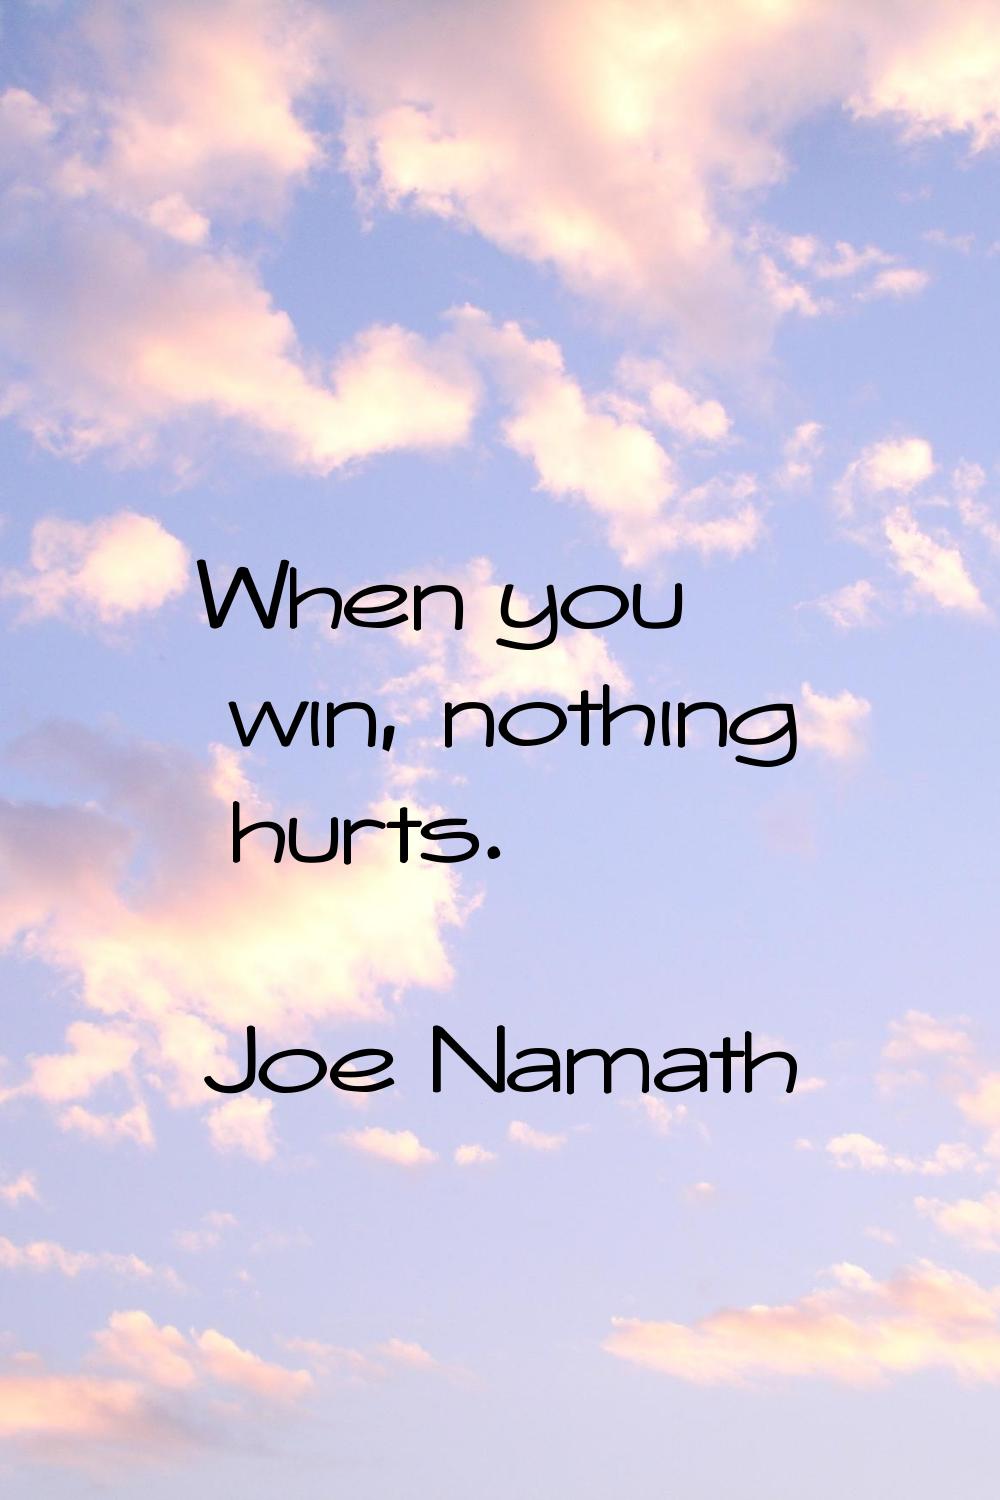 When you win, nothing hurts.